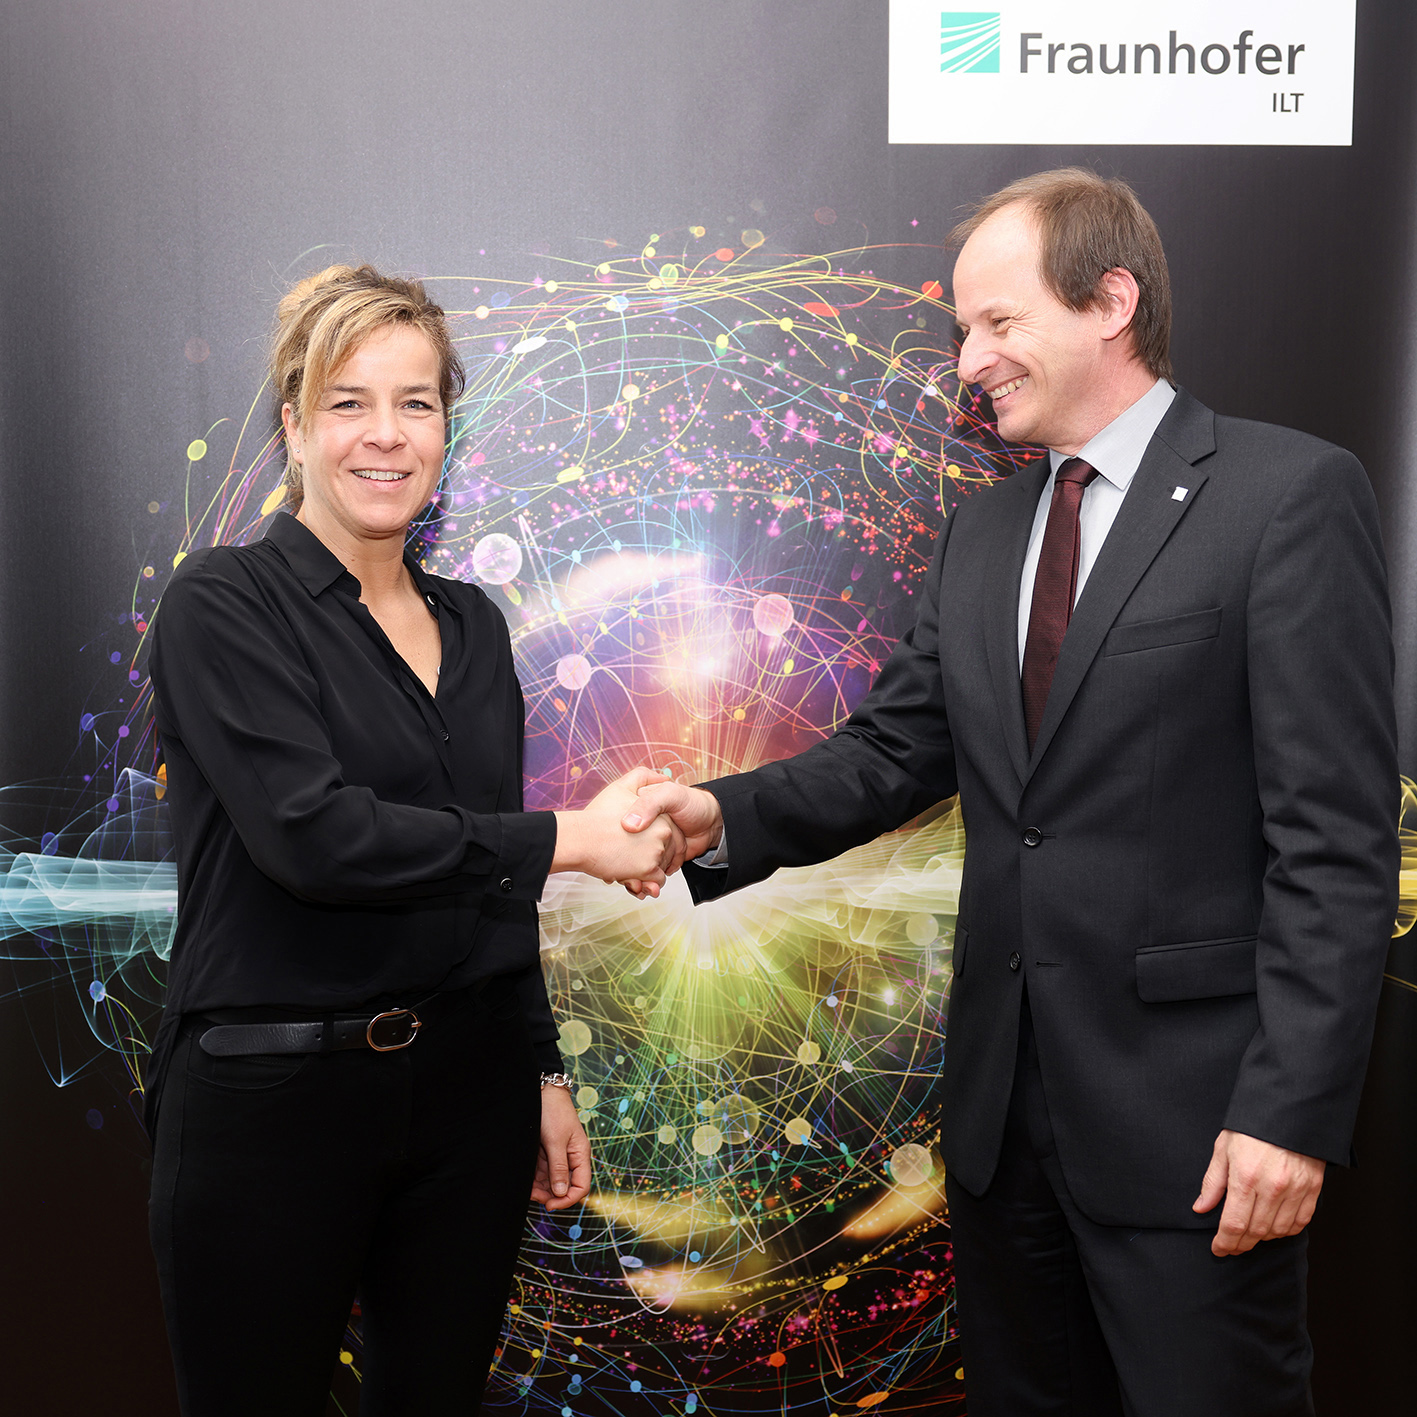 NRW Economics Minister Neubaur and Prof. Häfner, Director of Fraunhofer ILT, at the launch of the "N-Quik" project, funded by the state of NRW.